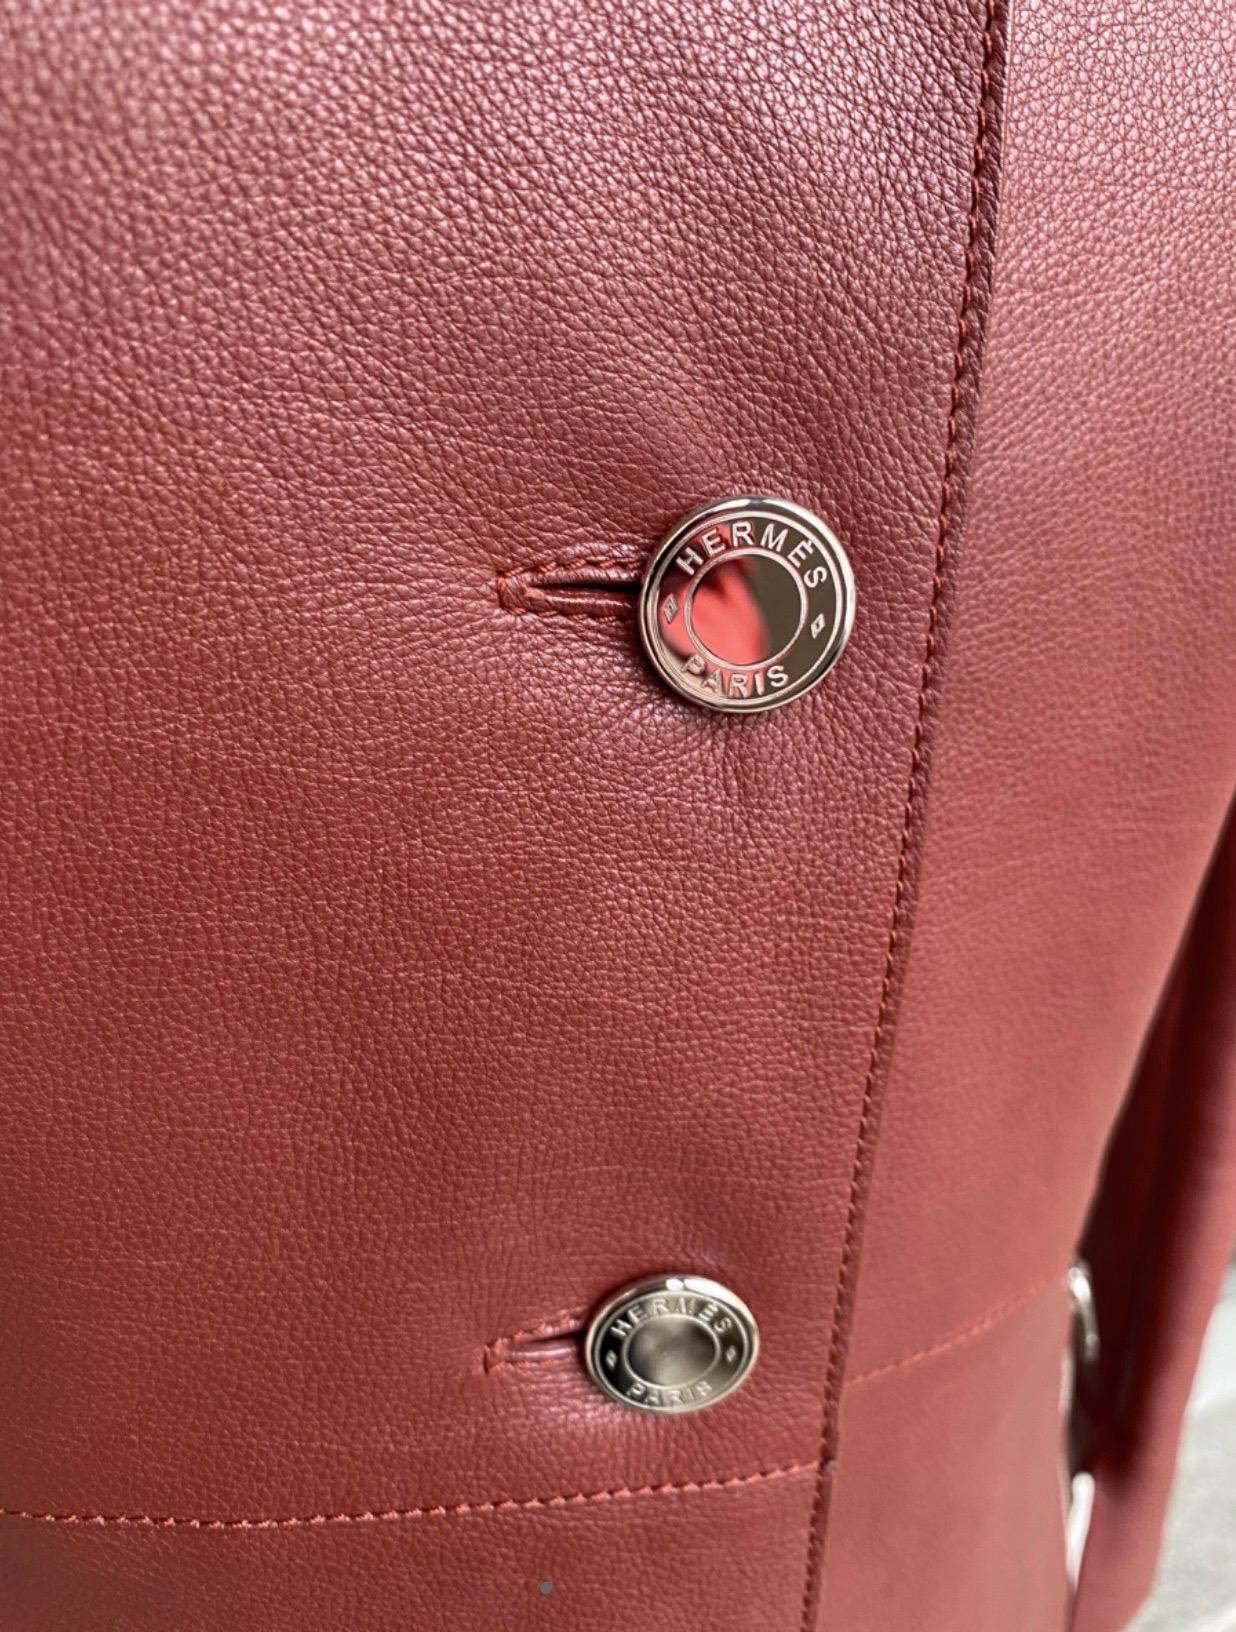 Hermes jacket in burgundy leather, size 34 French therefore 38 Italian, very soft leather, with logoed buttons and zips, as in the photo there are white stitching on the neck and back that characterize the silhouette.
As good as new ! 